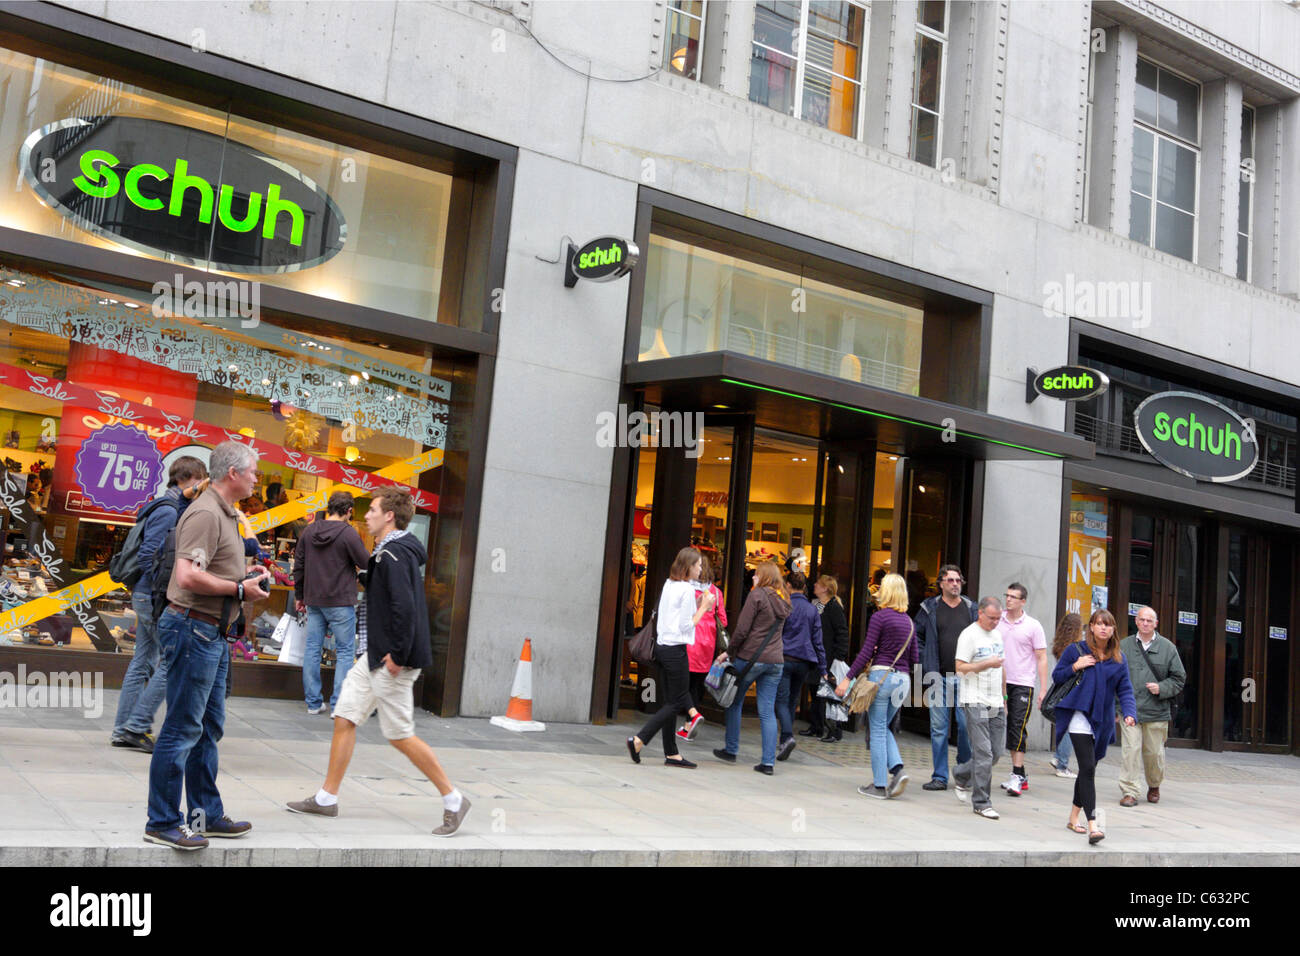 SCHUH LONDON,situated on the busy shopping thoroughfare Oxford Street,one of the country`s leading shoe retailers. Stock Photo